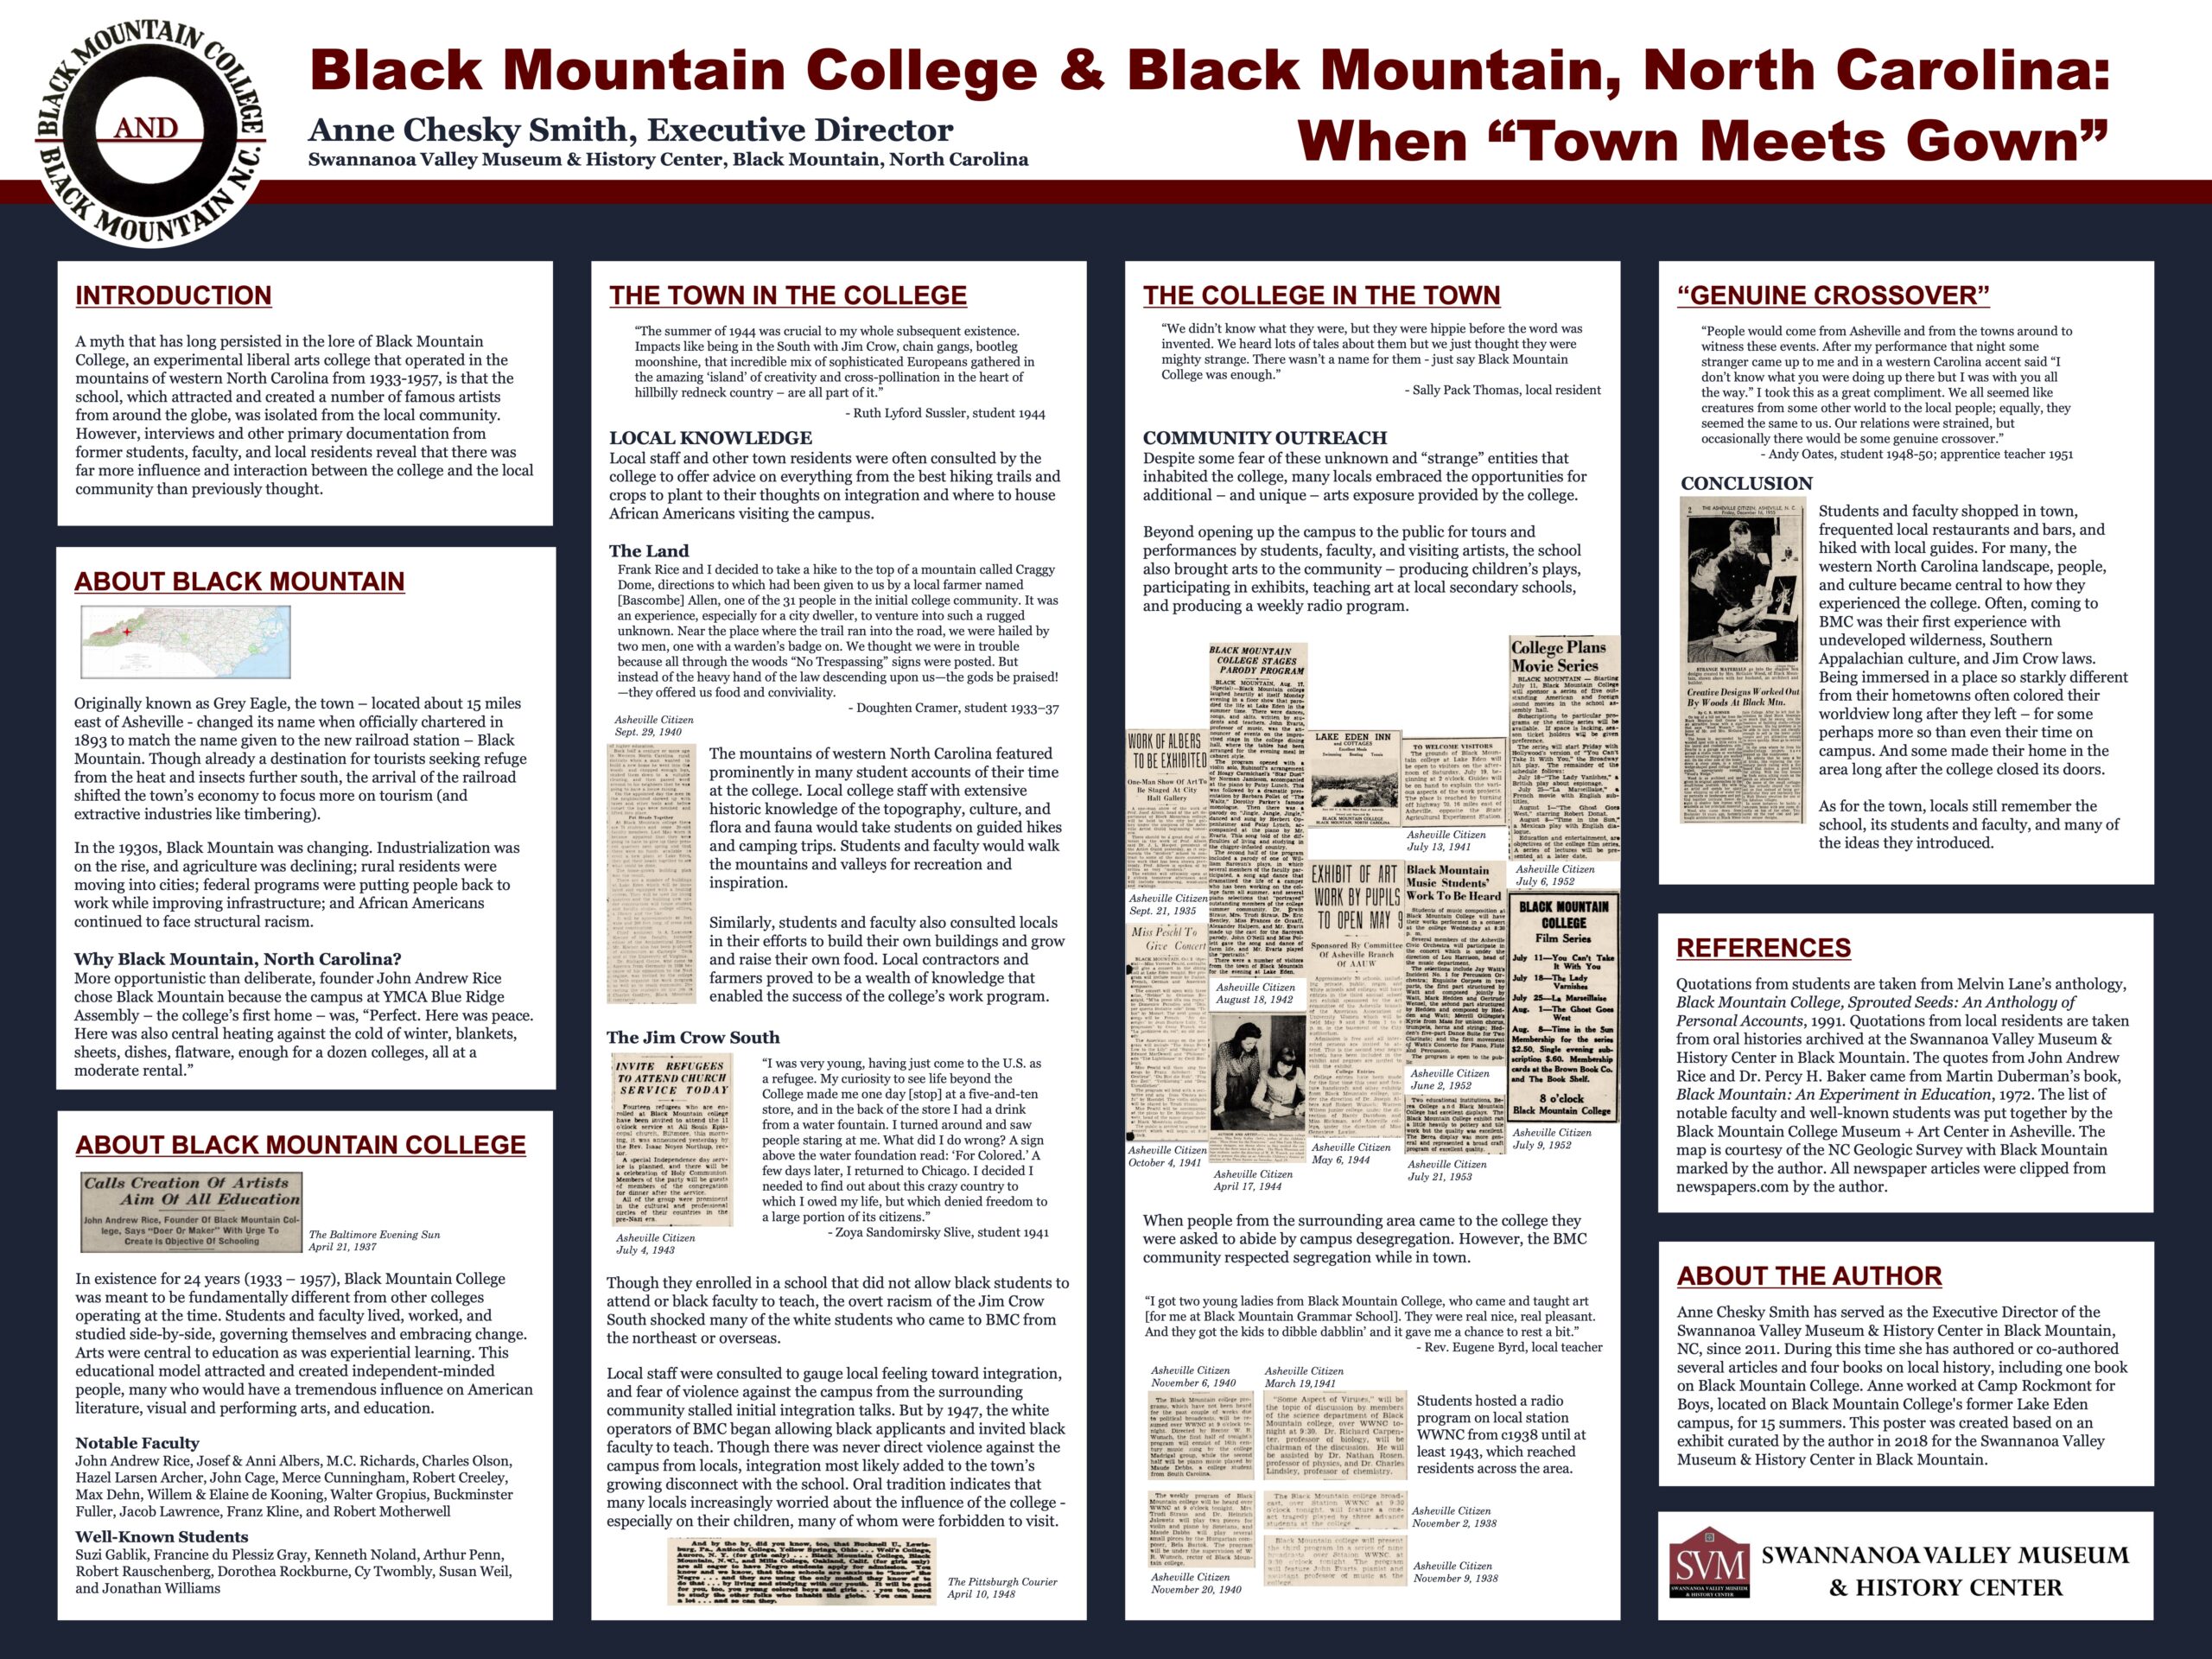 Poster created by Anne Chesky Smith for the Swannanoa Valley Museum’s exhibition, Black Mountain College and Black Mountain, North Carolina: Where ‘Town’ Meets ‘Gown.’ Shown at the Appalachian Studies Association Conference for Concurrent Session 6 March 12-15, 2020, University of Kentucky, Lexington, Kentucky. Reproduced with permission from Anne Chesky Smith.